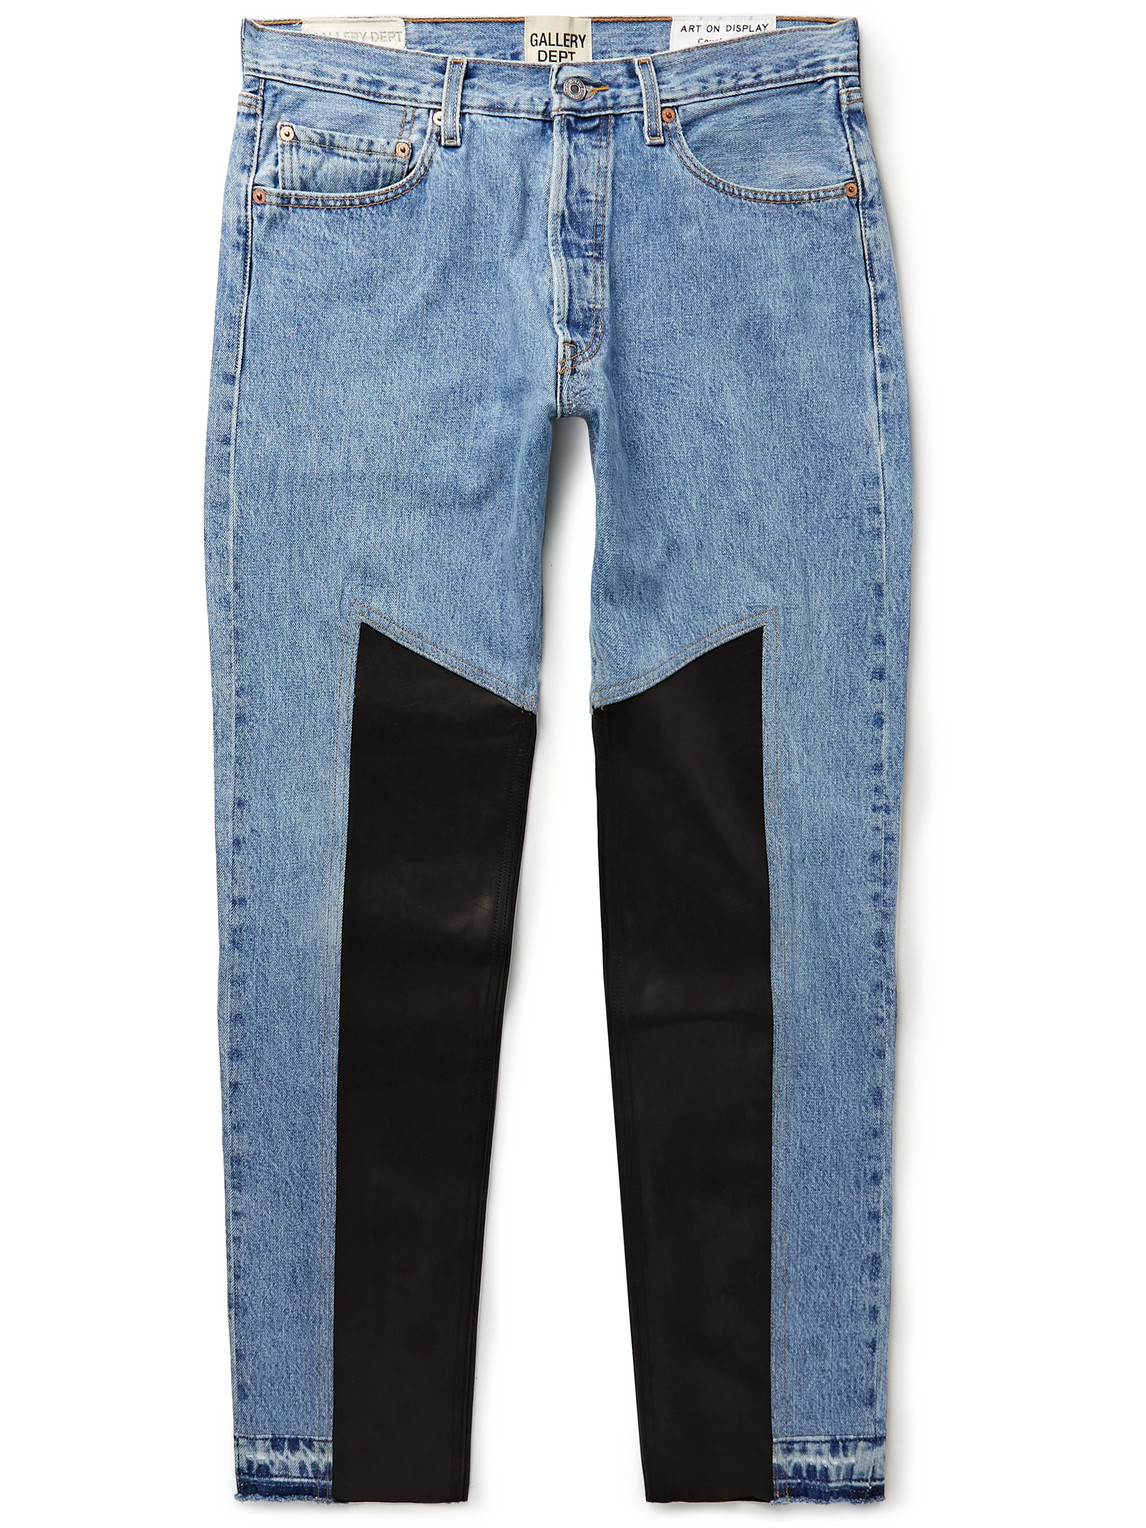 Gallery Dept. K.h. Slim-fit Leather-panelled Jeans In Blue